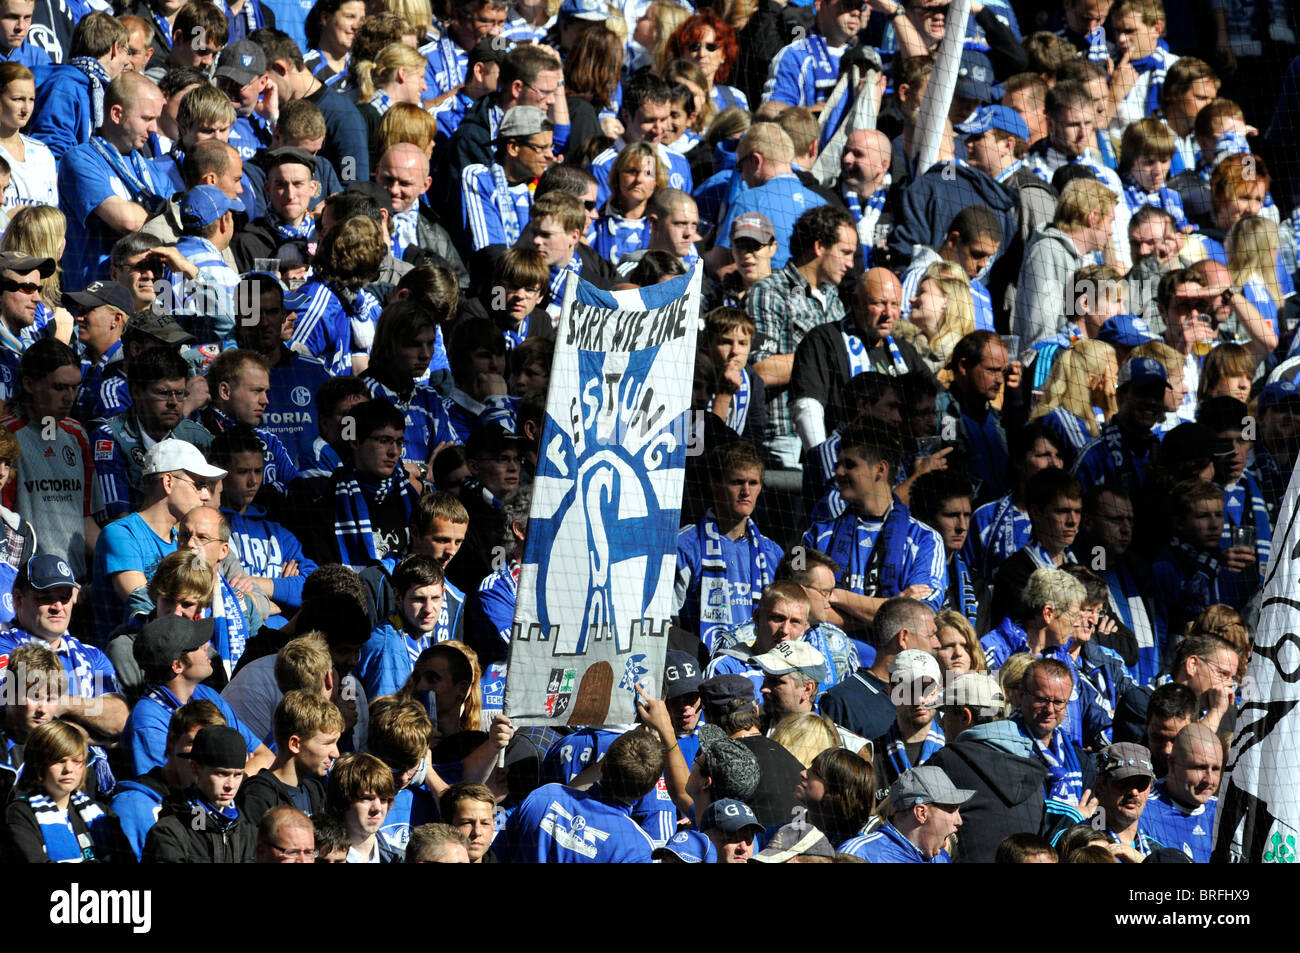 spectators in the Arena auf Schalke support german football club Schalke 04 with large banners in Gelsenkirchen, Germany Stock Photo